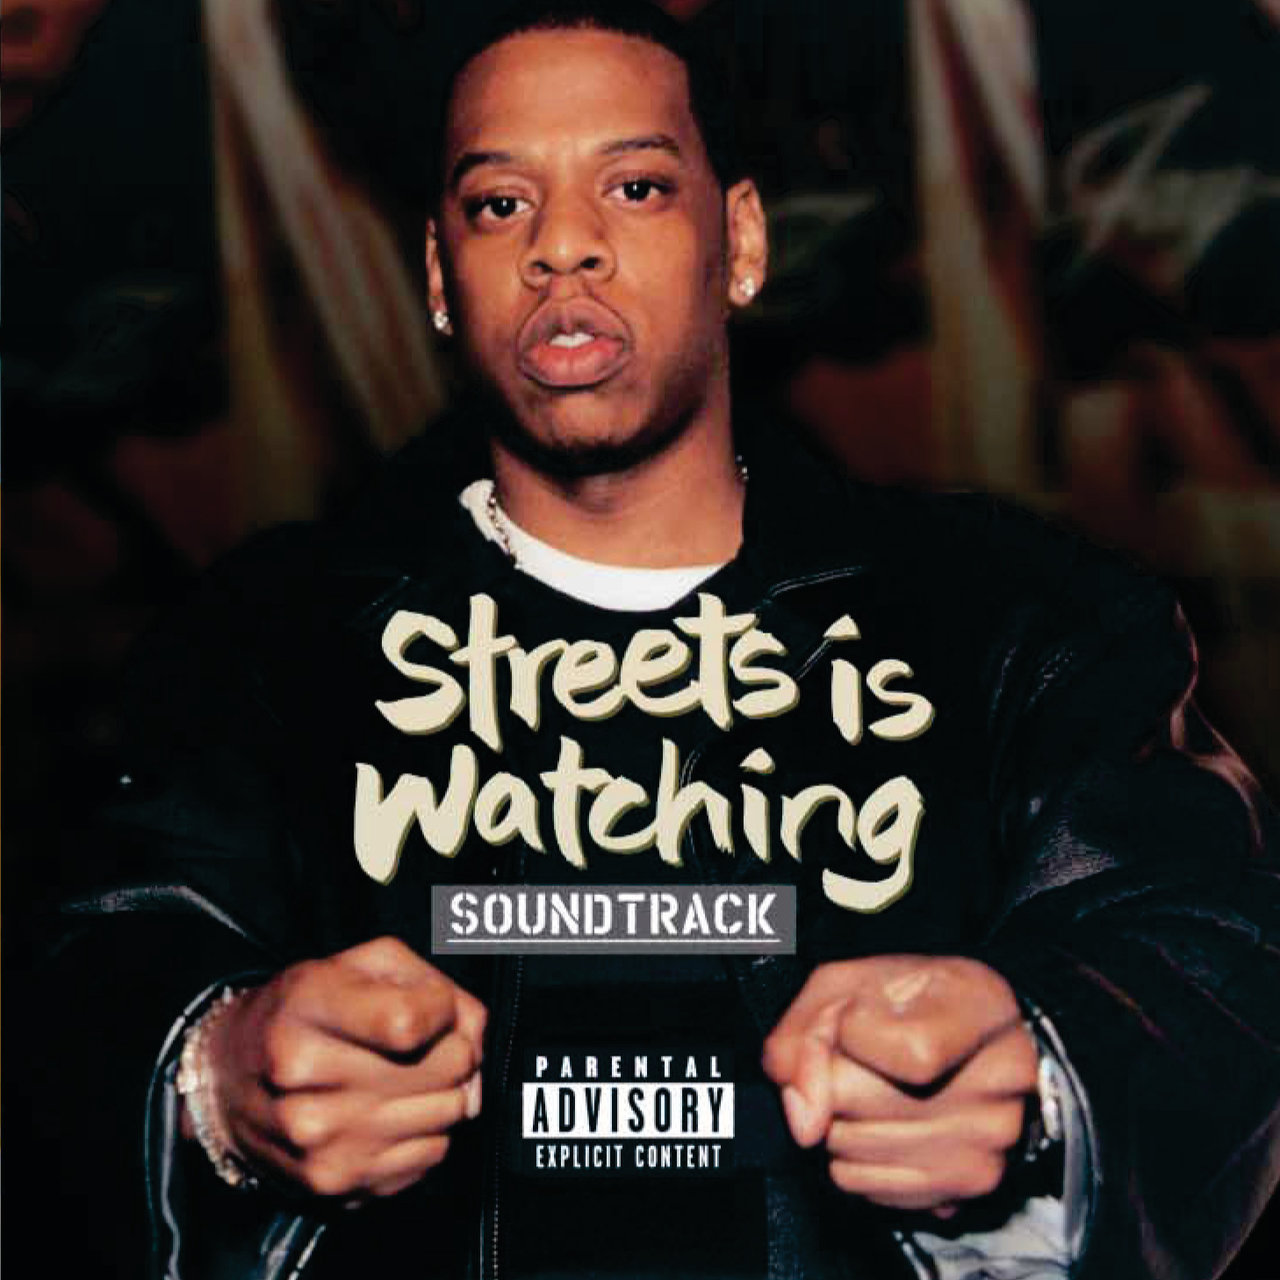 Streets Is Watching (Soundtrack) (Cover)